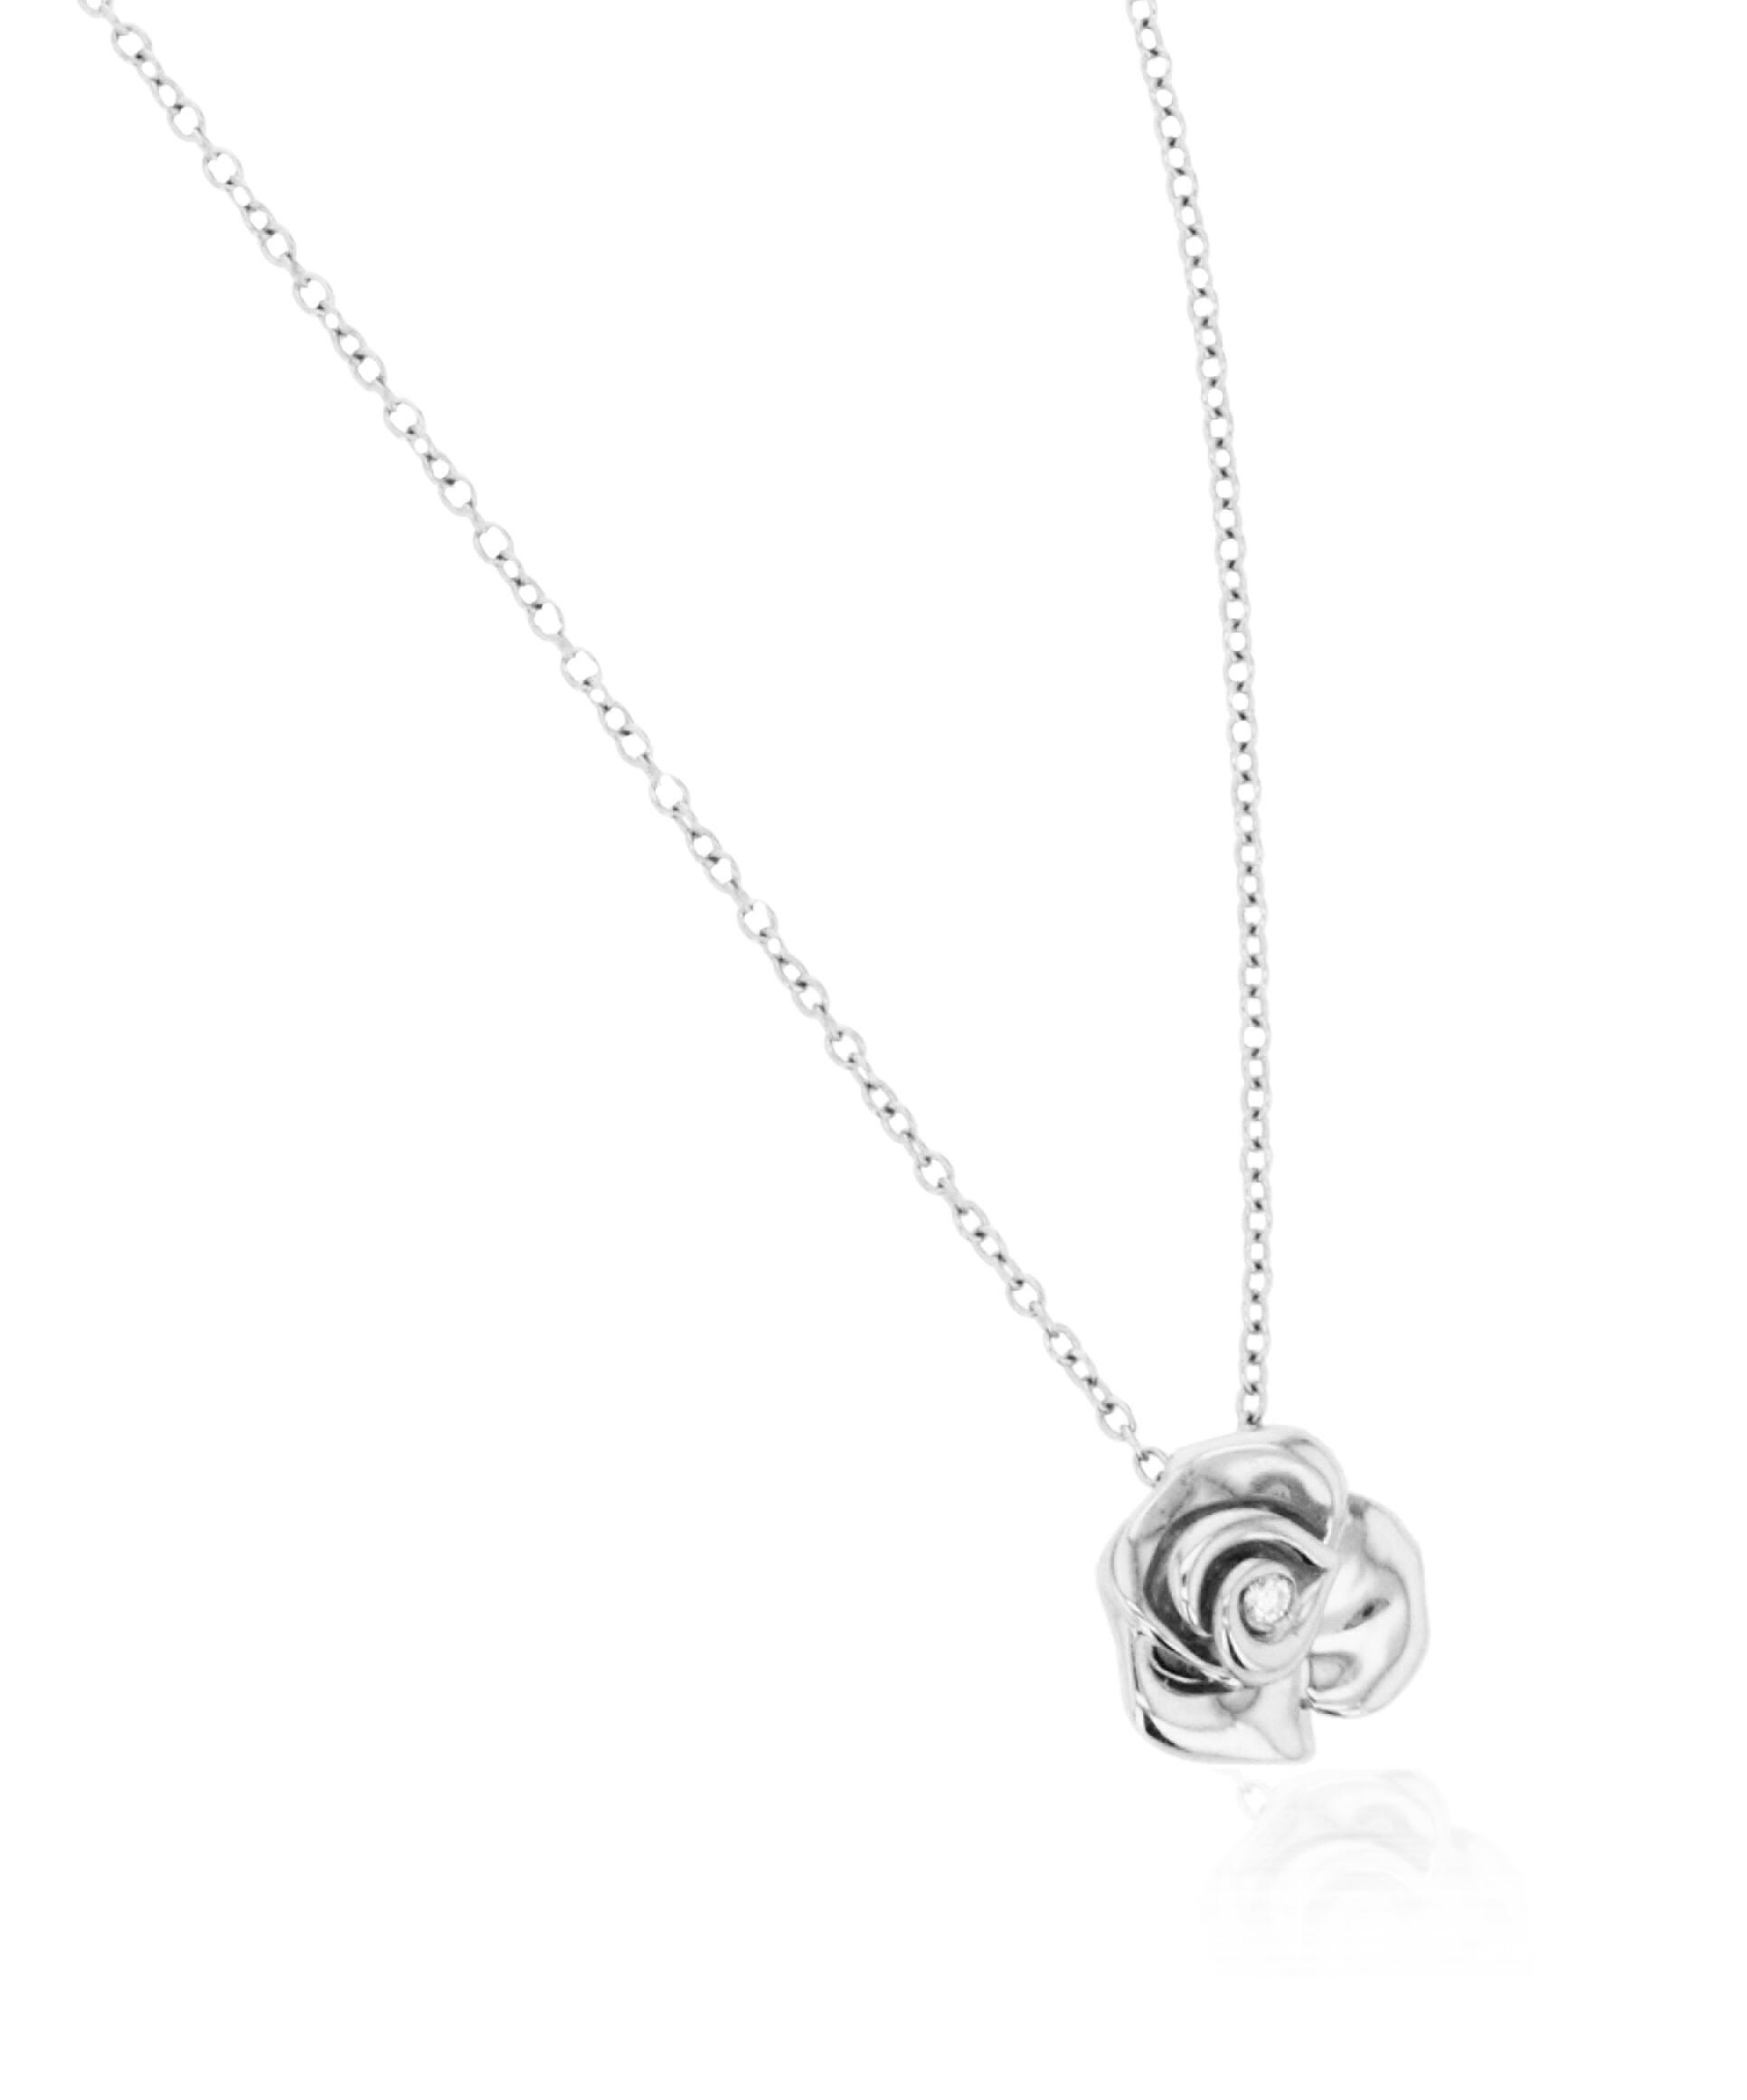 Schroeder Joailliers pendant from the "Rose of Luxembourg" collection in 18k white gold